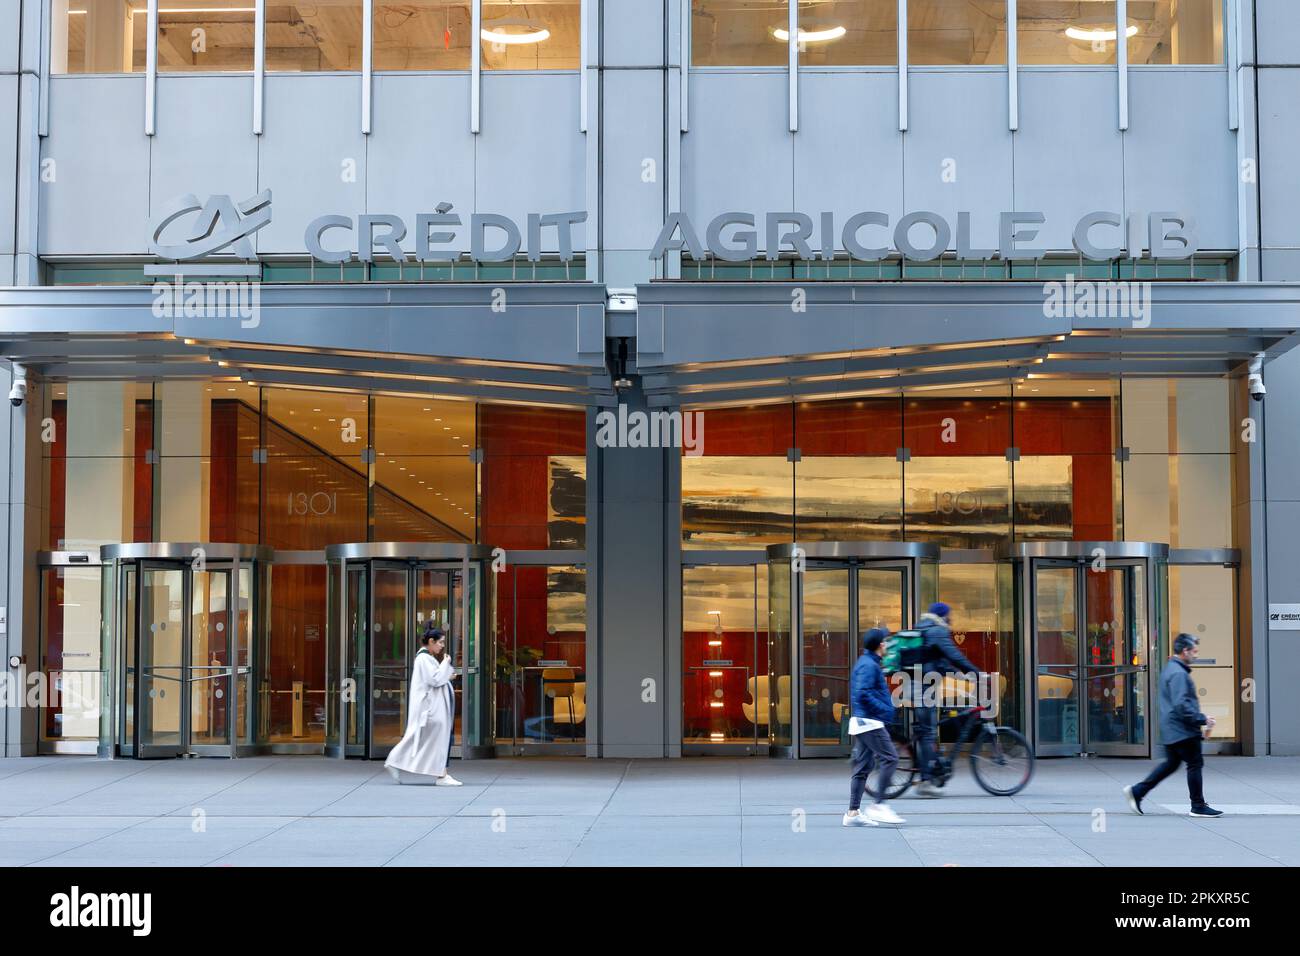 Credit Agricole Corporate & Investment Bank, 1301 Sixth Ave, New York. exterior of a French commercial bank US headquarters in Midtown Manhattan. Stock Photo